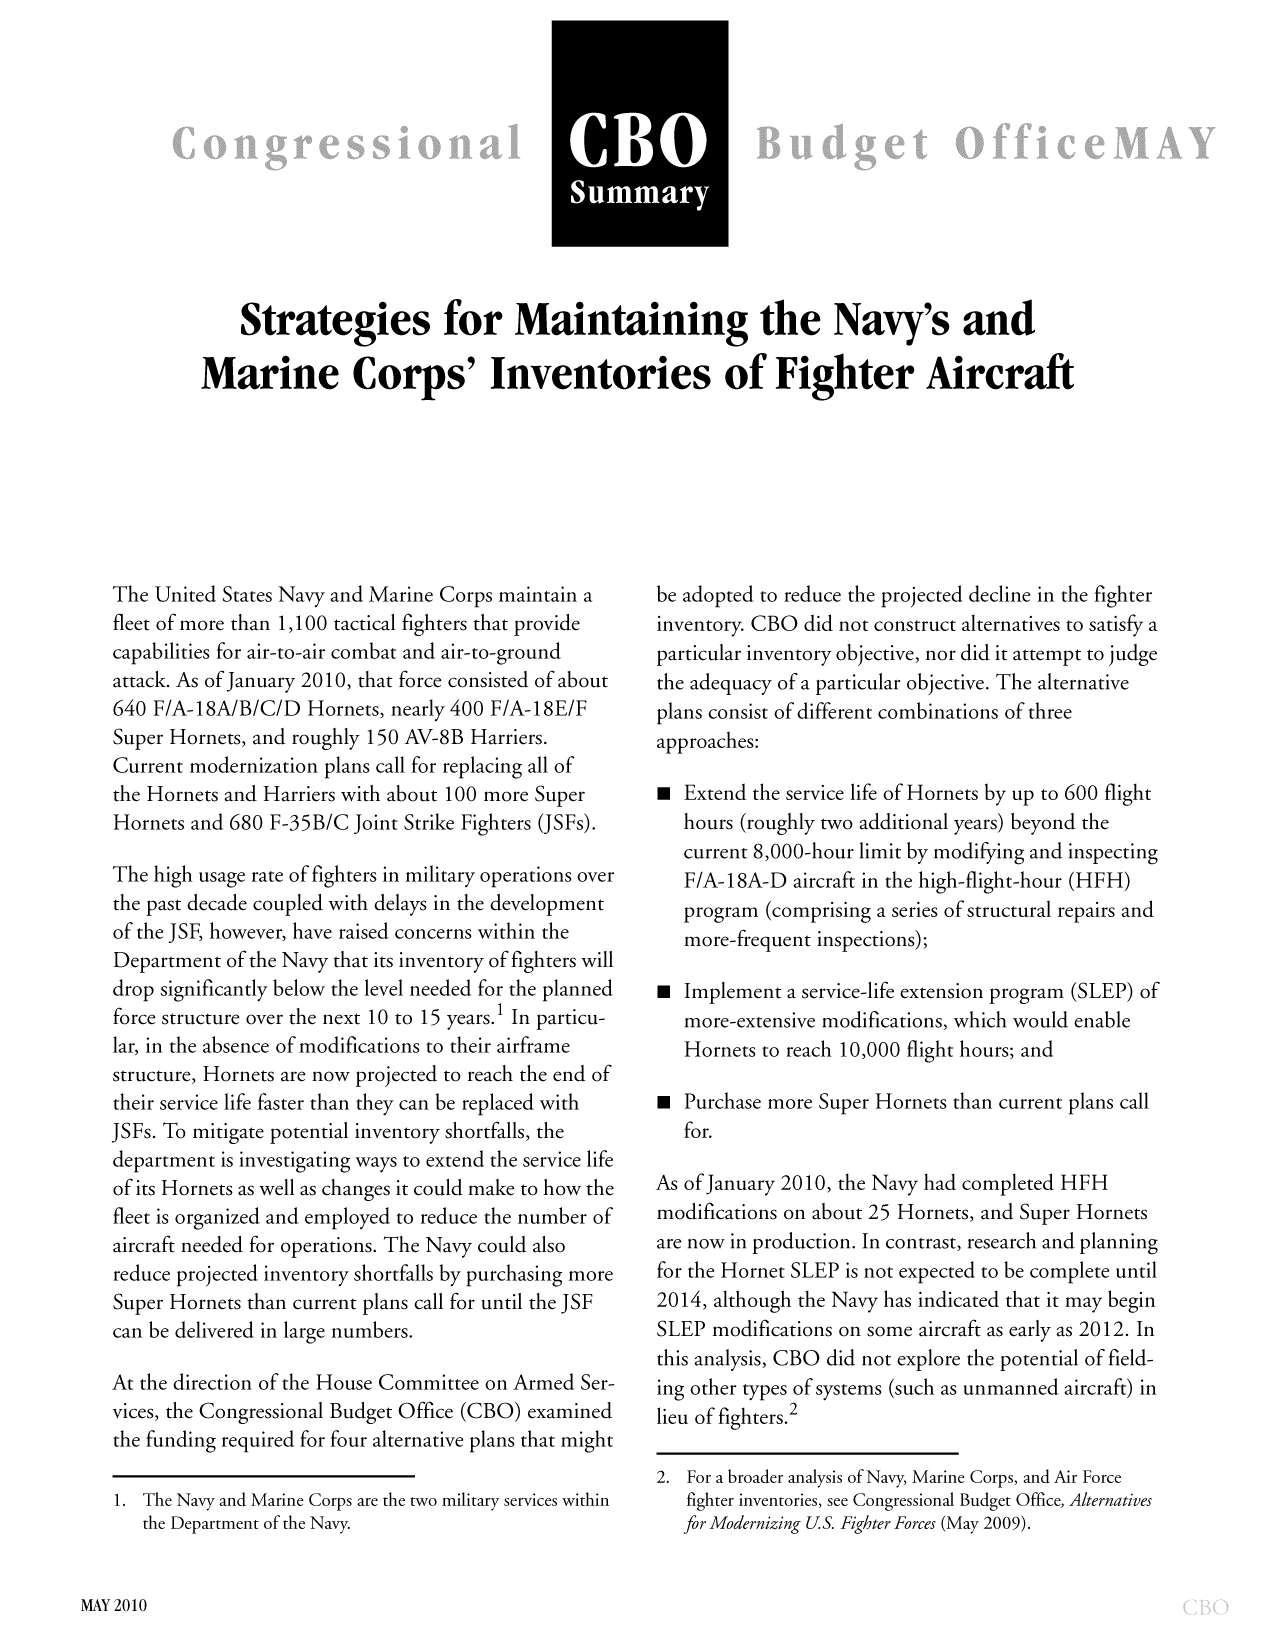 handle is hein.congrec/cbo9889 and id is 1 raw text is: CBO
Summary

Strategies for Maintaining the Navy's and
Marine Corps' Inventories of Fighter Aircraft

The United States Navy and Marine Corps maintain a
fleet of more than 1,100 tactical fighters that provide
capabilities for air-to-air combat and air-to-ground
attack. As of January 2010, that force consisted of about
640 F/A-18A/B/C/D Hornets, nearly 400 F/A-18E/F
Super Hornets, and roughly 150 AV-8B Harriers.
Current modernization plans call for replacing all of
the Hornets and Harriers with about 100 more Super
Hornets and 680 F-35B/C Joint Strike Fighters (JSFs).
The high usage rate of fighters in military operations over
the past decade coupled with delays in the development
of the JSF, however, have raised concerns within the
Department of the Navy that its inventory of fighters will
drop significantly below the level needed for the planned
force structure over the next 10 to 15 years.1 In particu-
lar, in the absence of modifications to their airframe
structure, Hornets are now projected to reach the end of
their service life faster than they can be replaced with
JSFs. To mitigate potential inventory shortfalls, the
department is investigating ways to extend the service life
of its Hornets as well as changes it could make to how the
fleet is organized and employed to reduce the number of
aircraft needed for operations. The Navy could also
reduce projected inventory shortfalls by purchasing more
Super Hornets than current plans call for until the JSF
can be delivered in large numbers.
At the direction of the House Committee on Armed Ser-
vices, the Congressional Budget Office (CBO) examined
the funding required for four alternative plans that might
1. The Navy and Marine Corps are the two military services within
the Department of the Navy.

be adopted to reduce the projected decline in the fighter
inventory. CBO did not construct alternatives to satisfy a
particular inventory objective, nor did it attempt to judge
the adequacy of a particular objective. The alternative
plans consist of different combinations of three
approaches:
 Extend the service life of Hornets by up to 600 flight
hours (roughly two additional years) beyond the
current 8,000-hour limit by modifying and inspecting
F/A-18A-D aircraft in the high-flight-hour (HFH)
program (comprising a series of structural repairs and
more-frequent inspections);
 Implement a service-life extension program (SLEP) of
more-extensive modifications, which would enable
Hornets to reach 10,000 flight hours; and
a Purchase more Super Hornets than current plans call
for.
As of January 2010, the Navy had completed HFH
modifications on about 25 Hornets, and Super Hornets
are now in production. In contrast, research and planning
for the Hornet SLEP is not expected to be complete until
2014, although the Navy has indicated that it may begin
SLEP modifications on some aircraft as early as 2012. In
this analysis, CBO did not explore the potential of field-
ing other types of systems (such as unmanned aircraft) in
lieu of fighters.2
2. For a broader analysis of Navy, Marine Corps, and Air Force
fighter inventories, see Congressional Budget Office, Alternatives
for Modernizing U.S. Fighter Forces (May 2009).

MAY 2010


